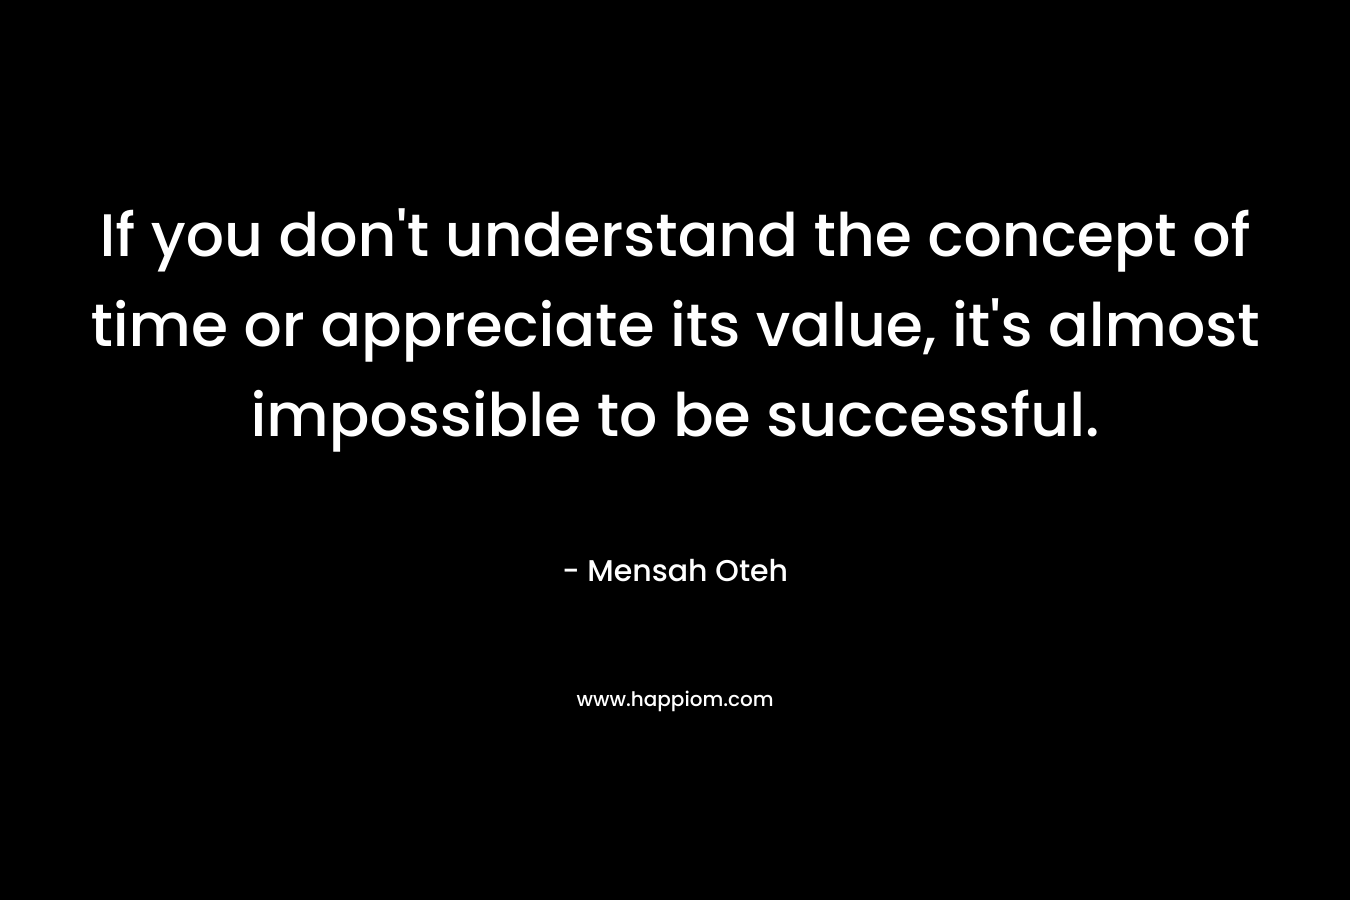 If you don't understand the concept of time or appreciate its value, it's almost impossible to be successful.